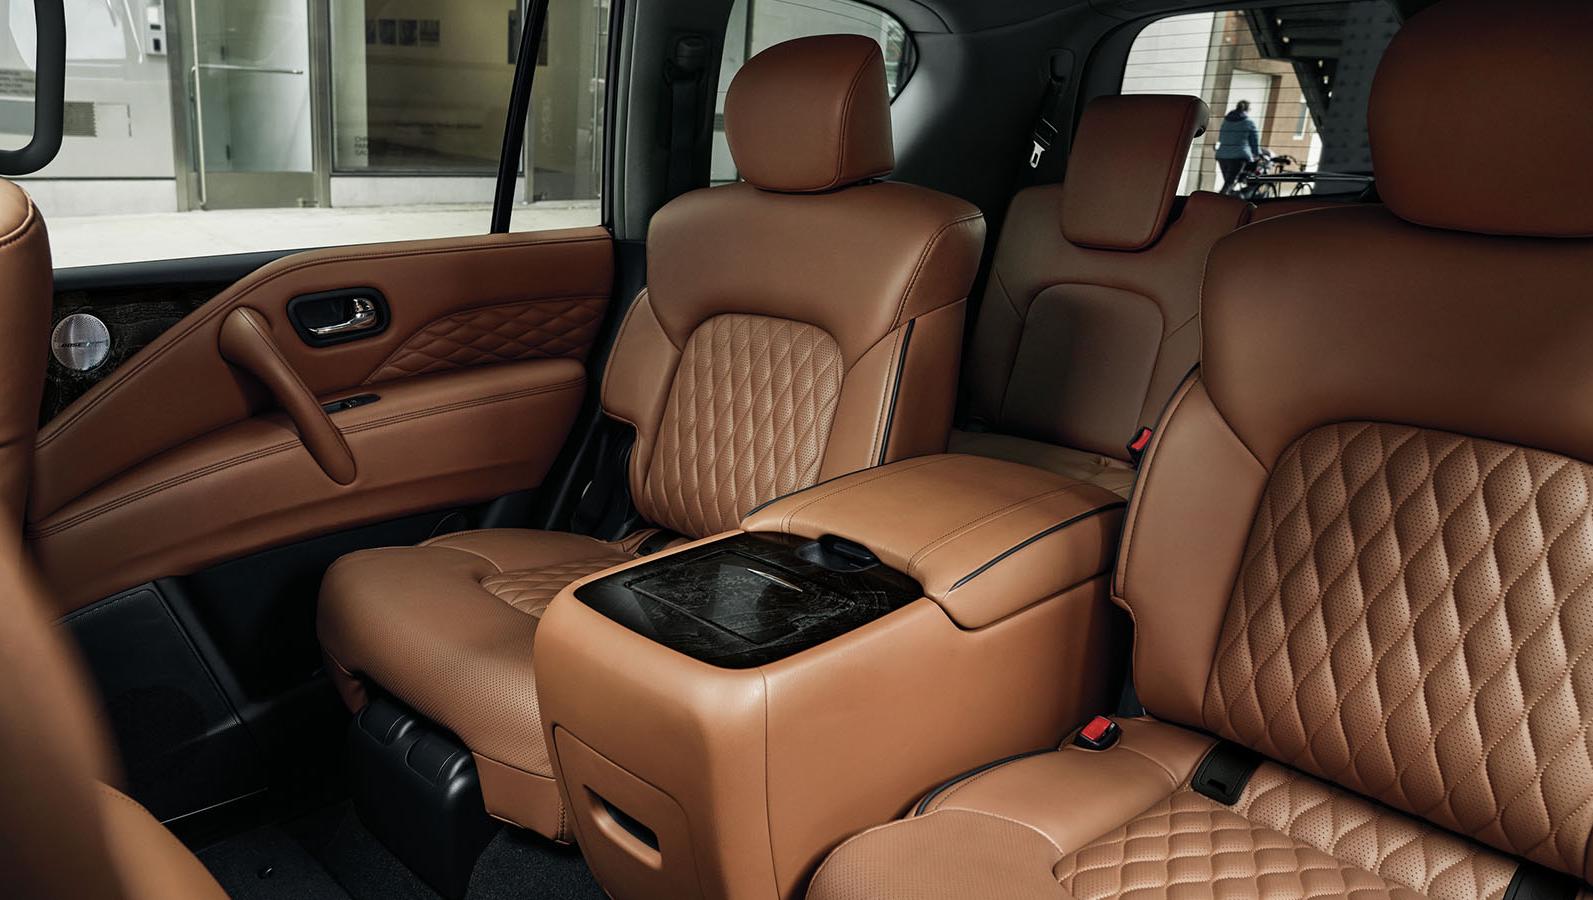 Heated seats feature power adjustments and available cooling.